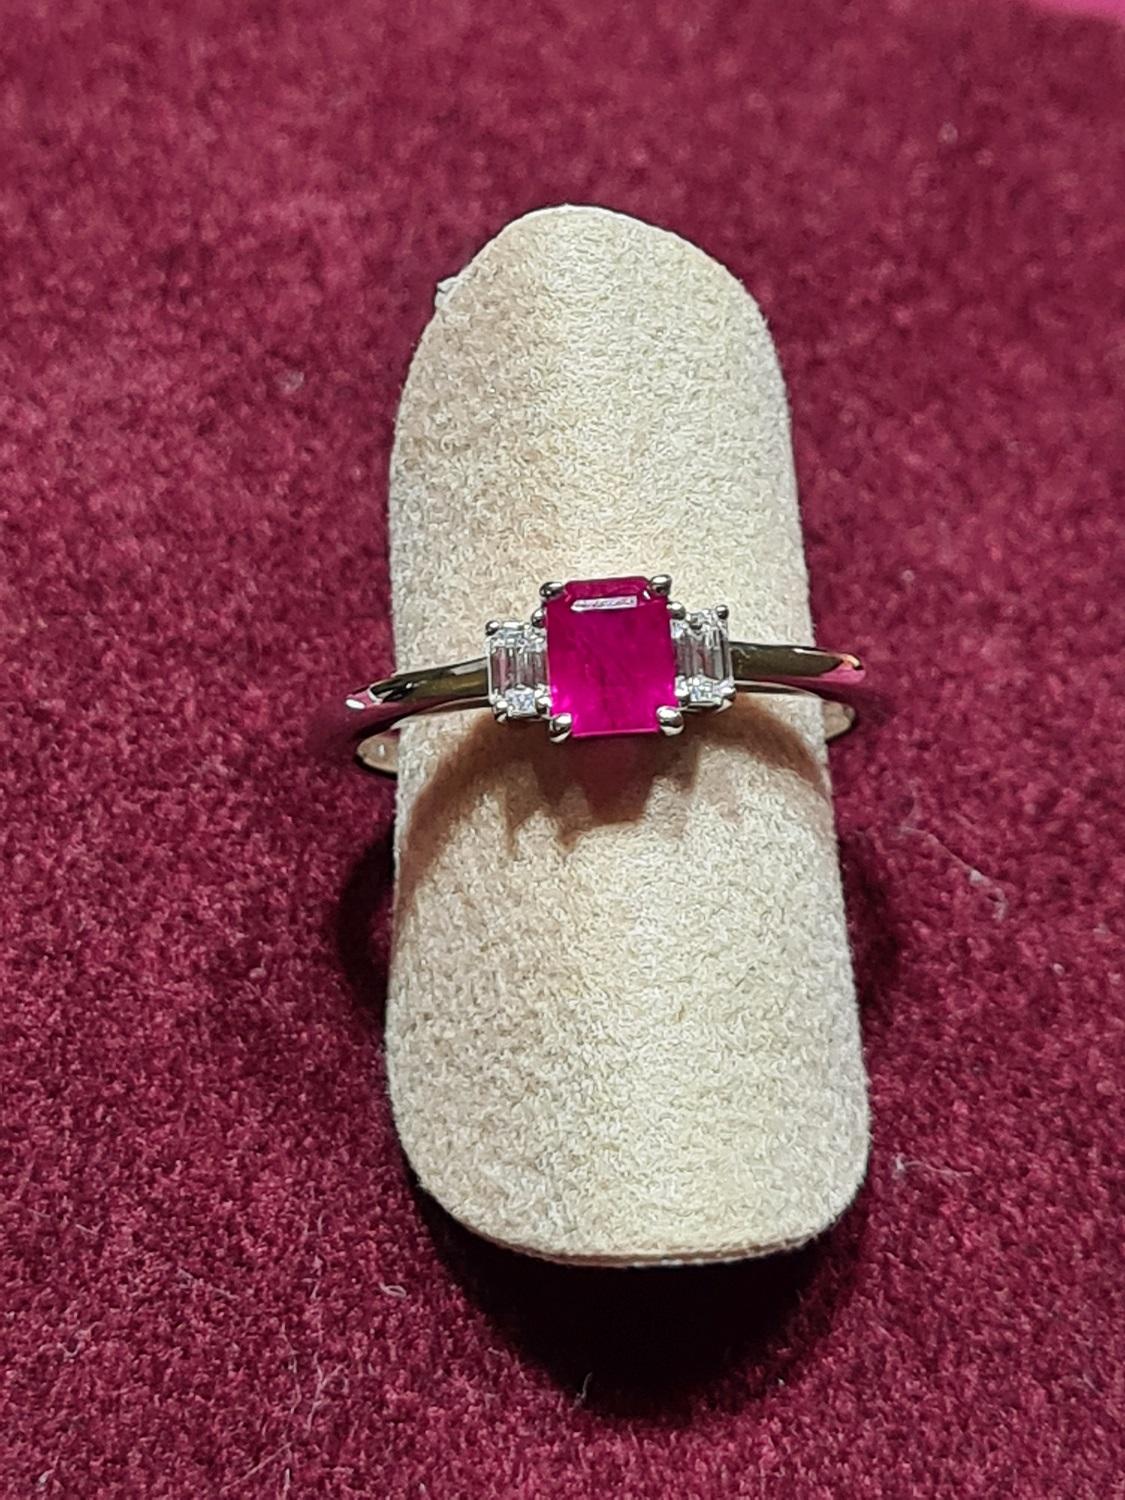 Beautiful modern solitaire ring. New ring with tags. The ring consists of white gold with 0.64 Ct natural ruby octagon cut and 0.17 Ct diamonds round cut.
Total weight: 2.38 grams
Metal: white gold 18Kt
New contemporary jewelry. 
US Ring size 6,5.